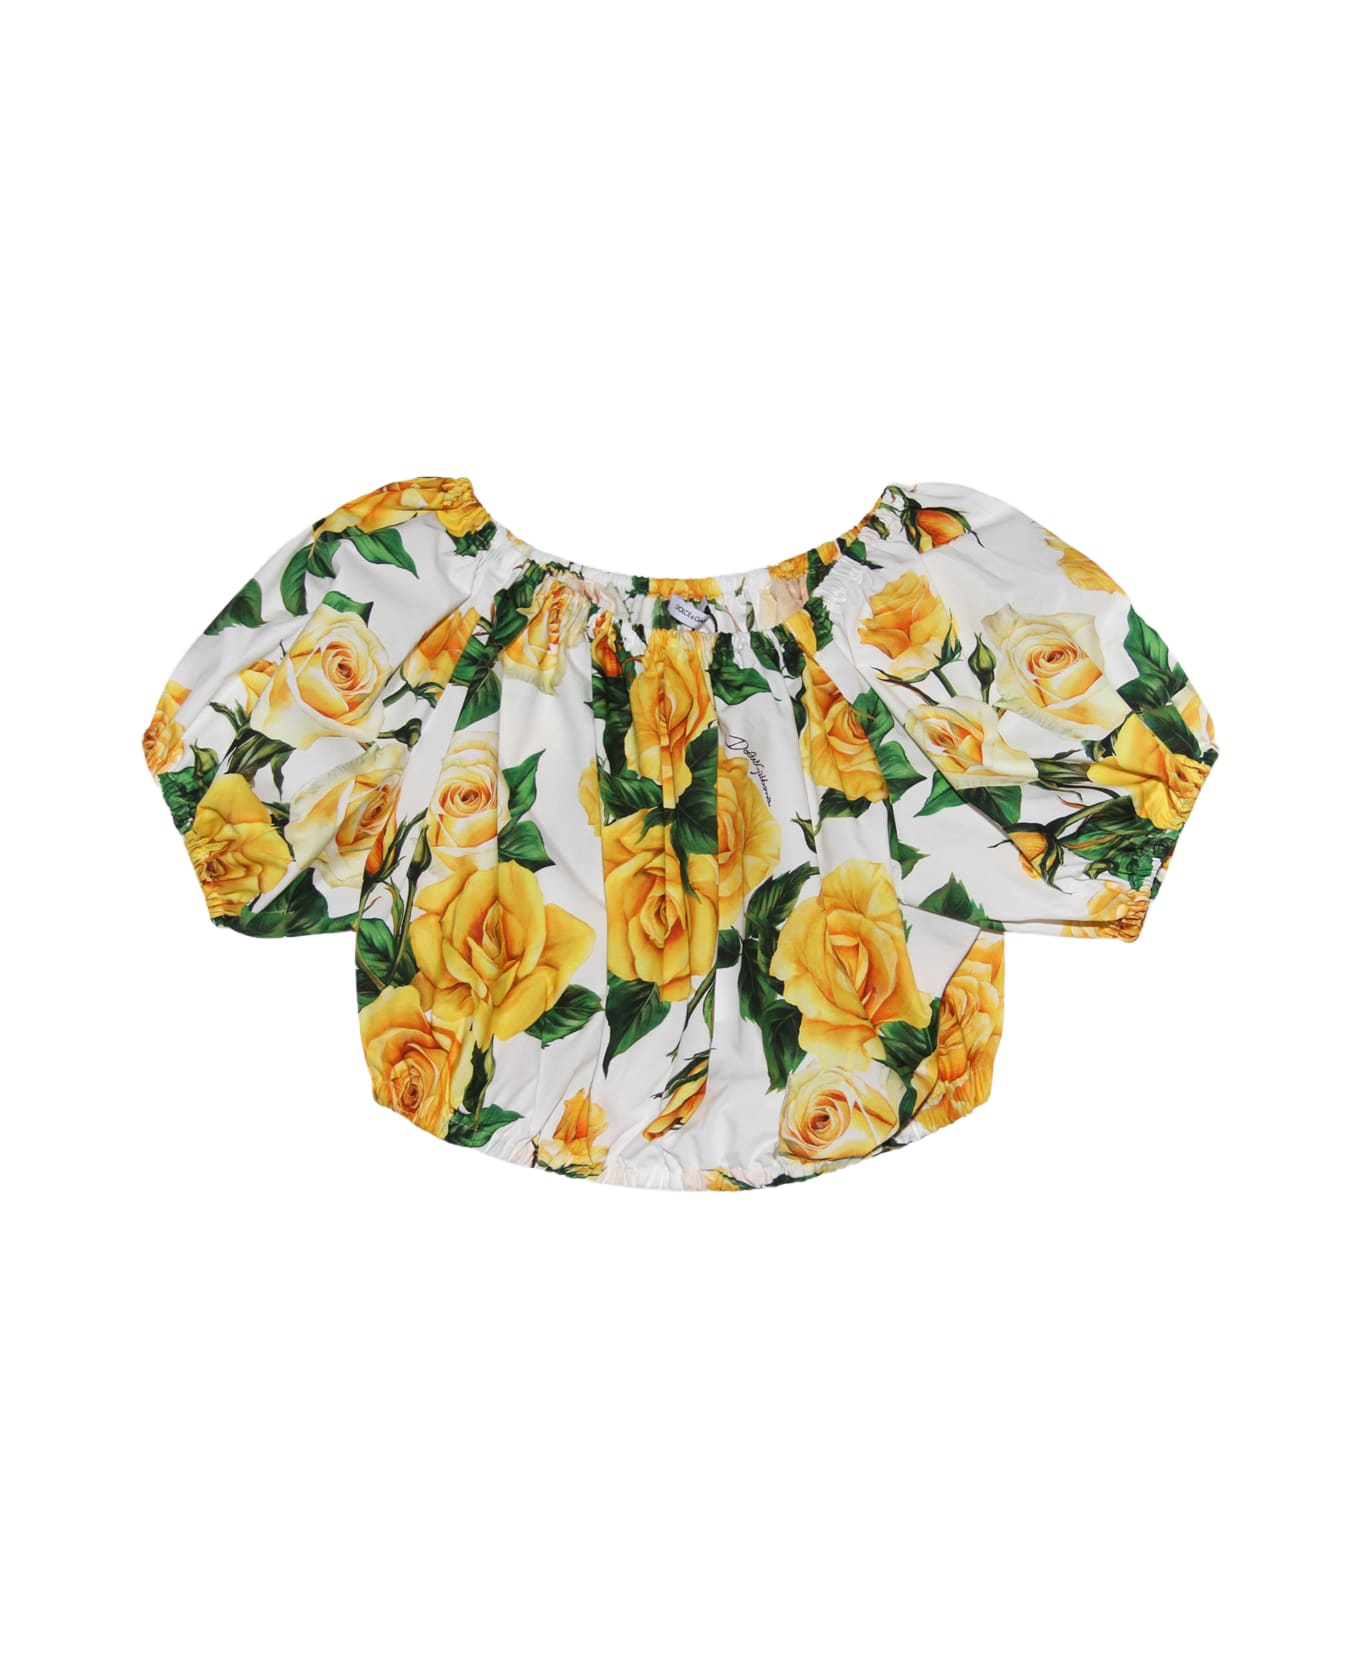 Dolce & Gabbana White, Yellow And Green Cotton Top - ROSE GIALLE F.DO BIANCO